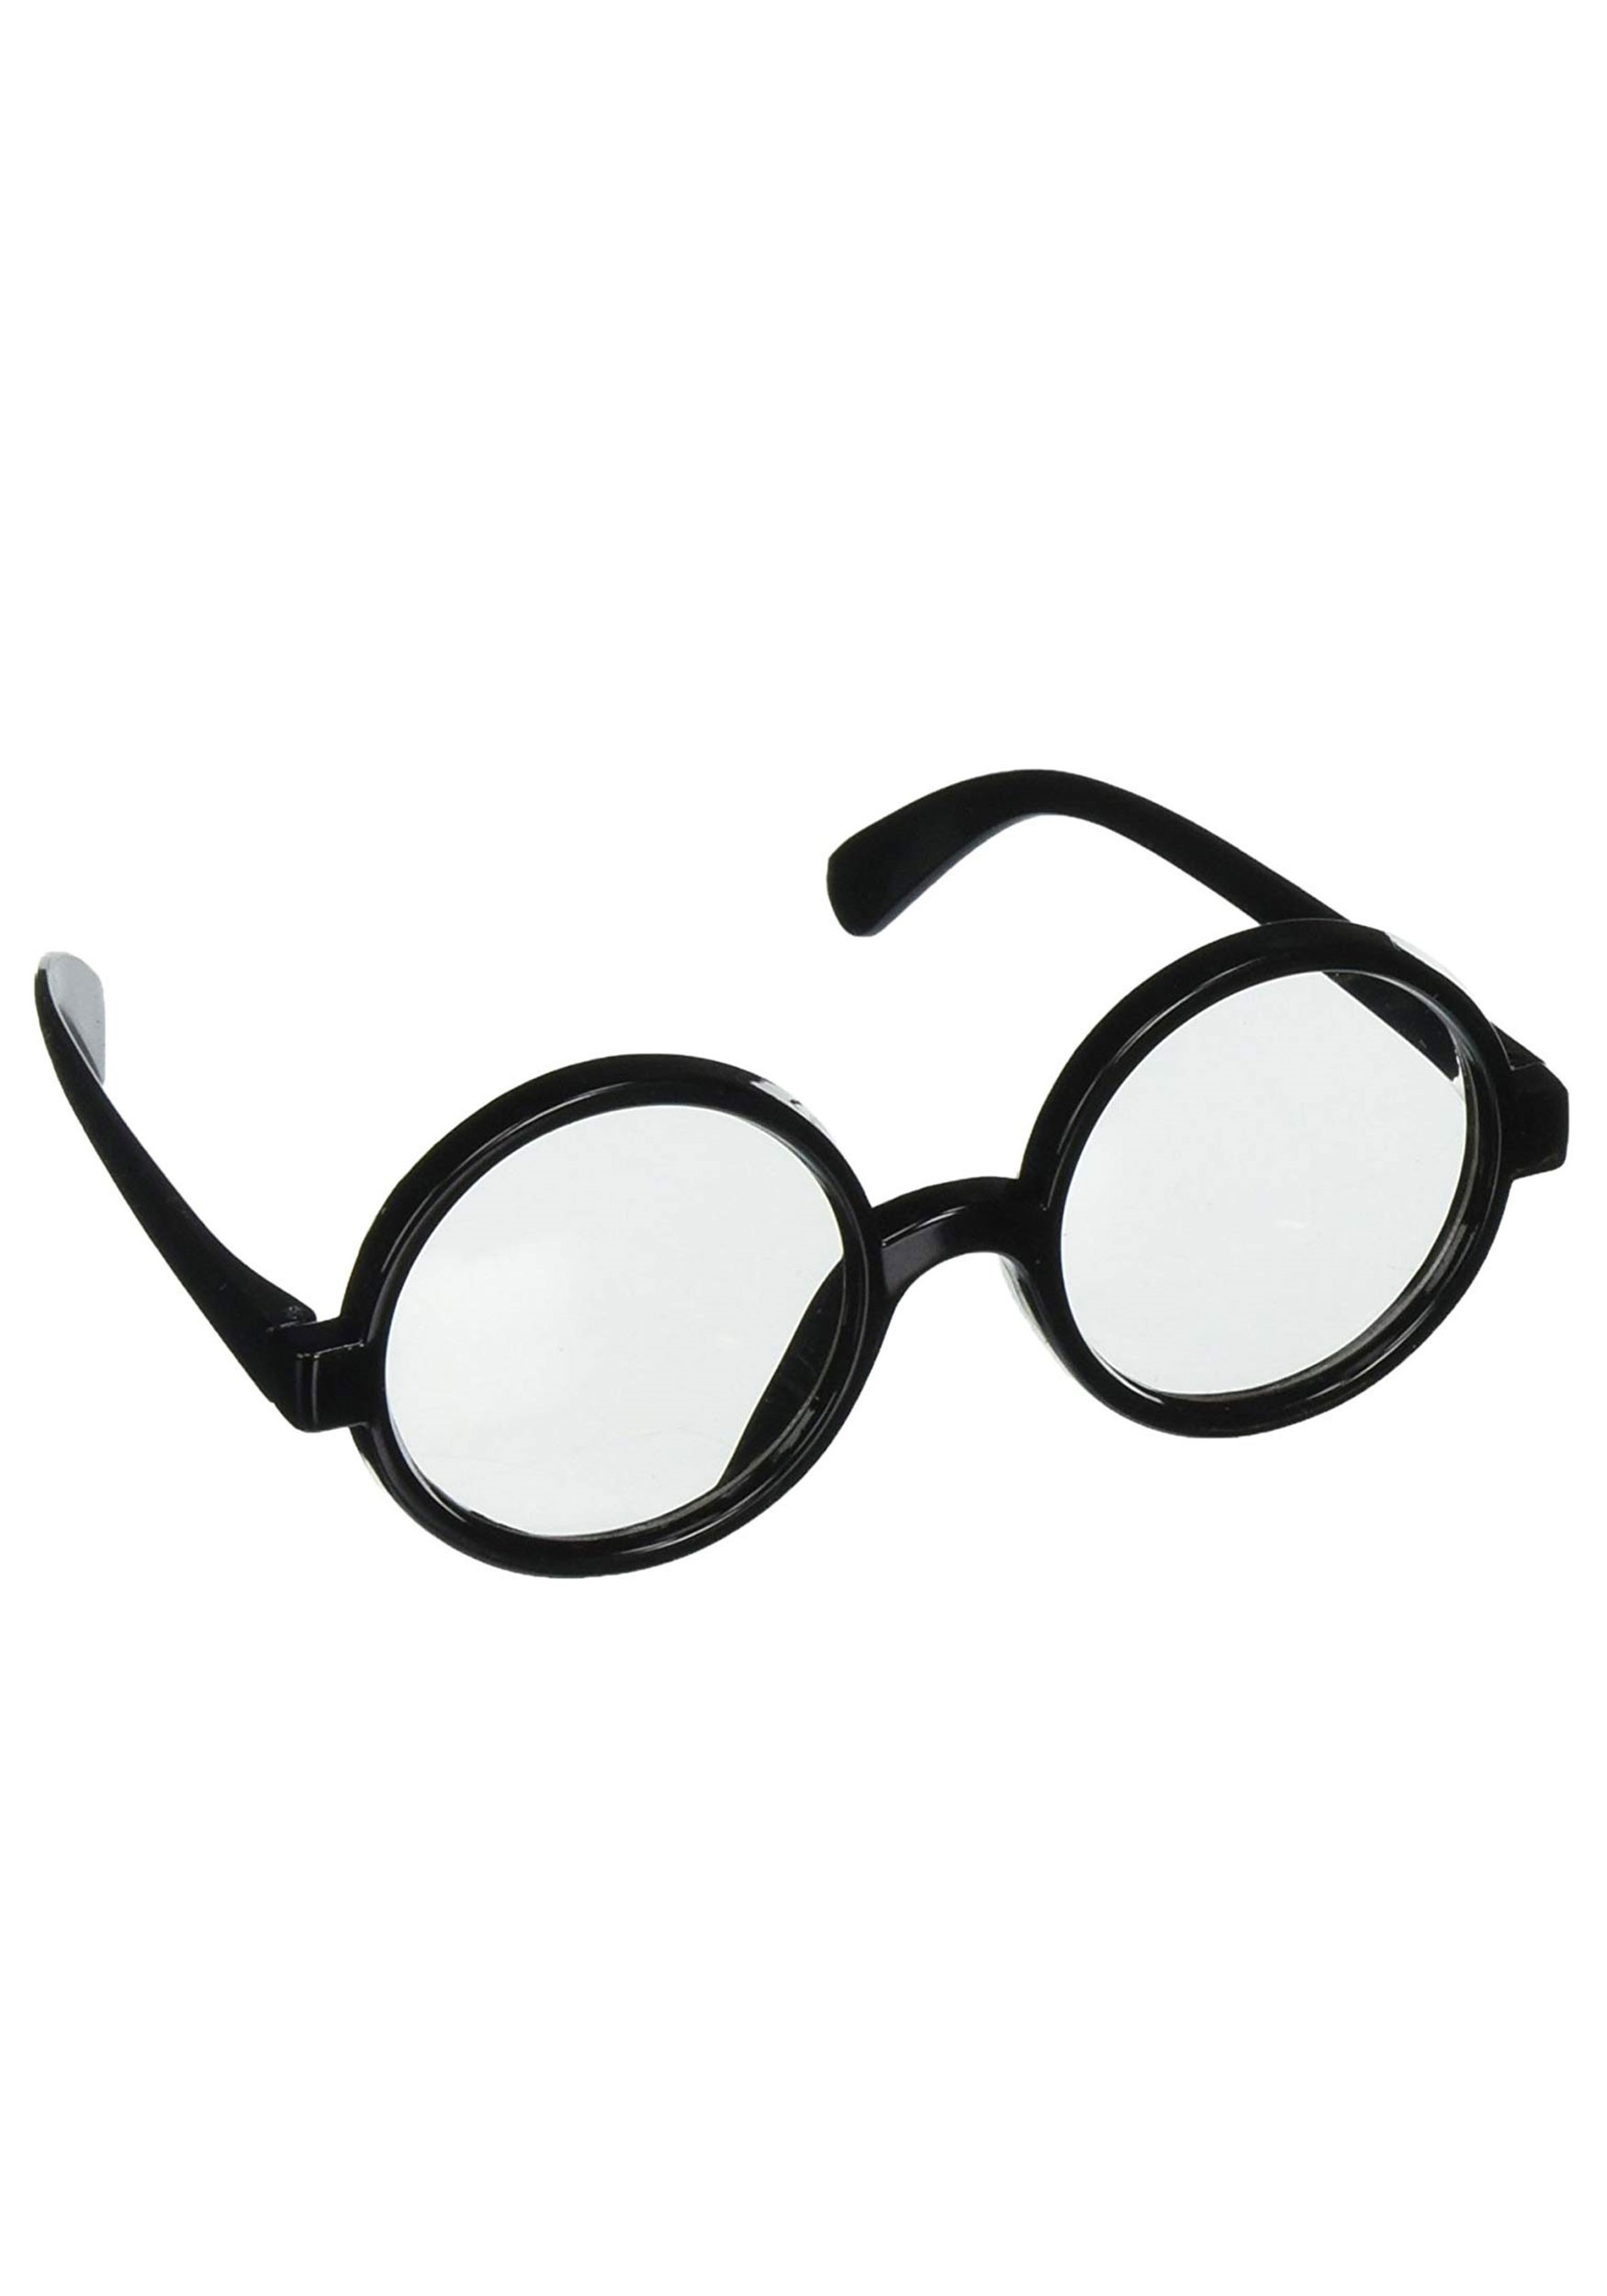 Dweeb Glasses for Adults